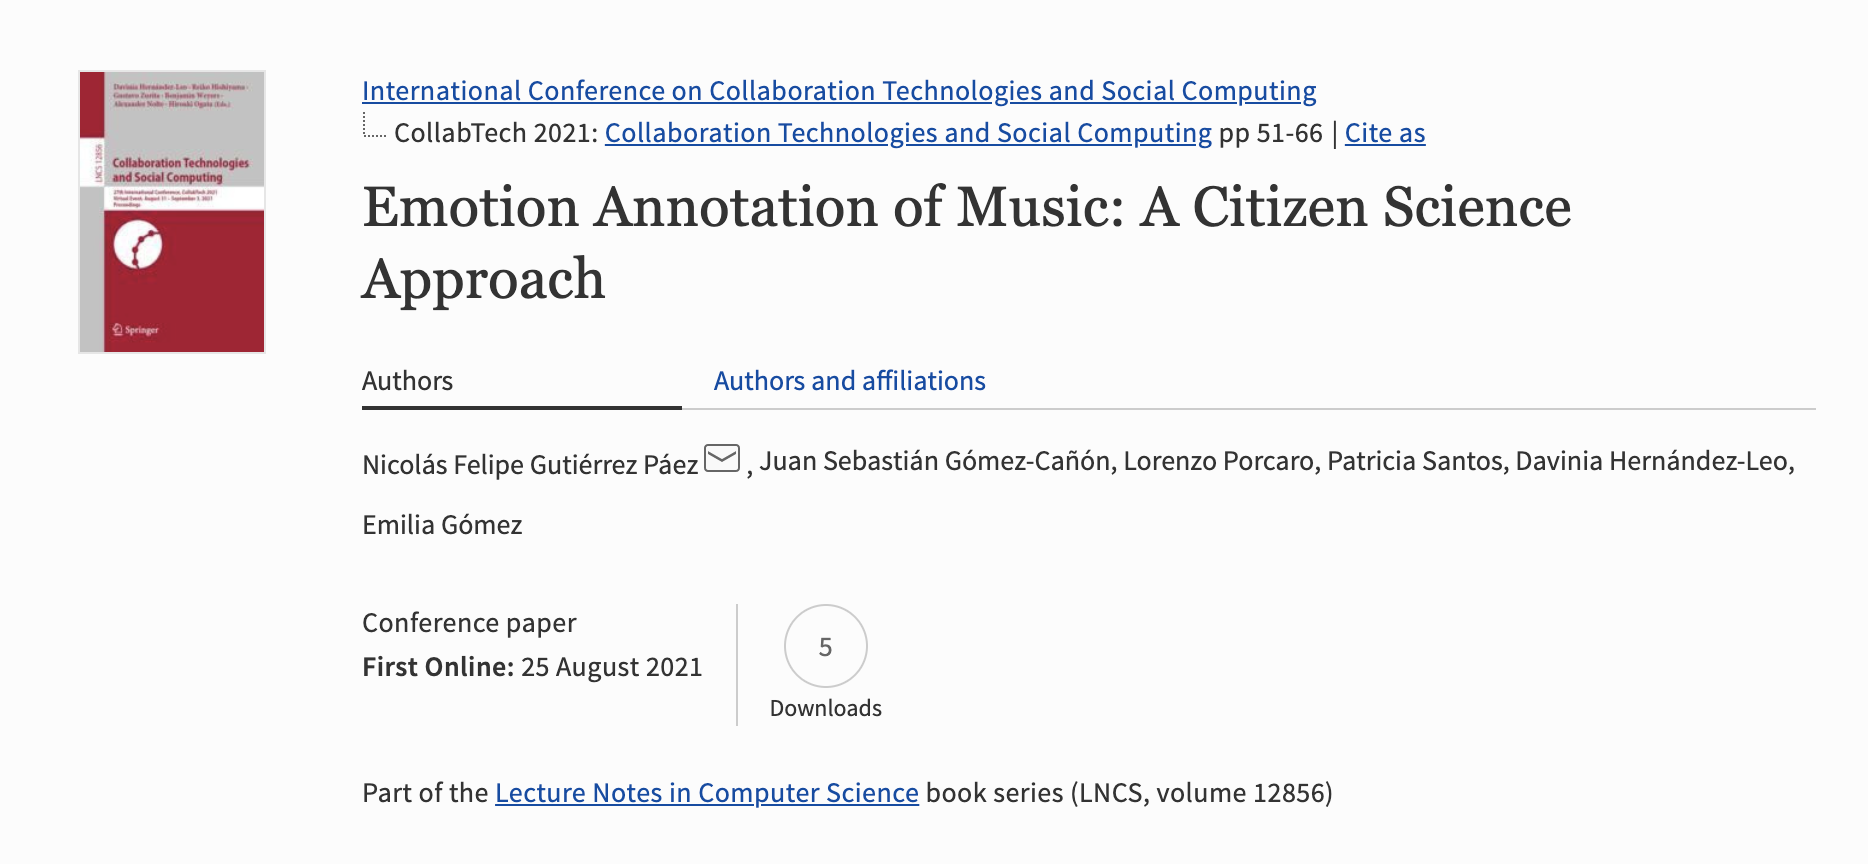 CollabTech2021 paper: Emotion Annotation of Music: A Citizen Science Approach